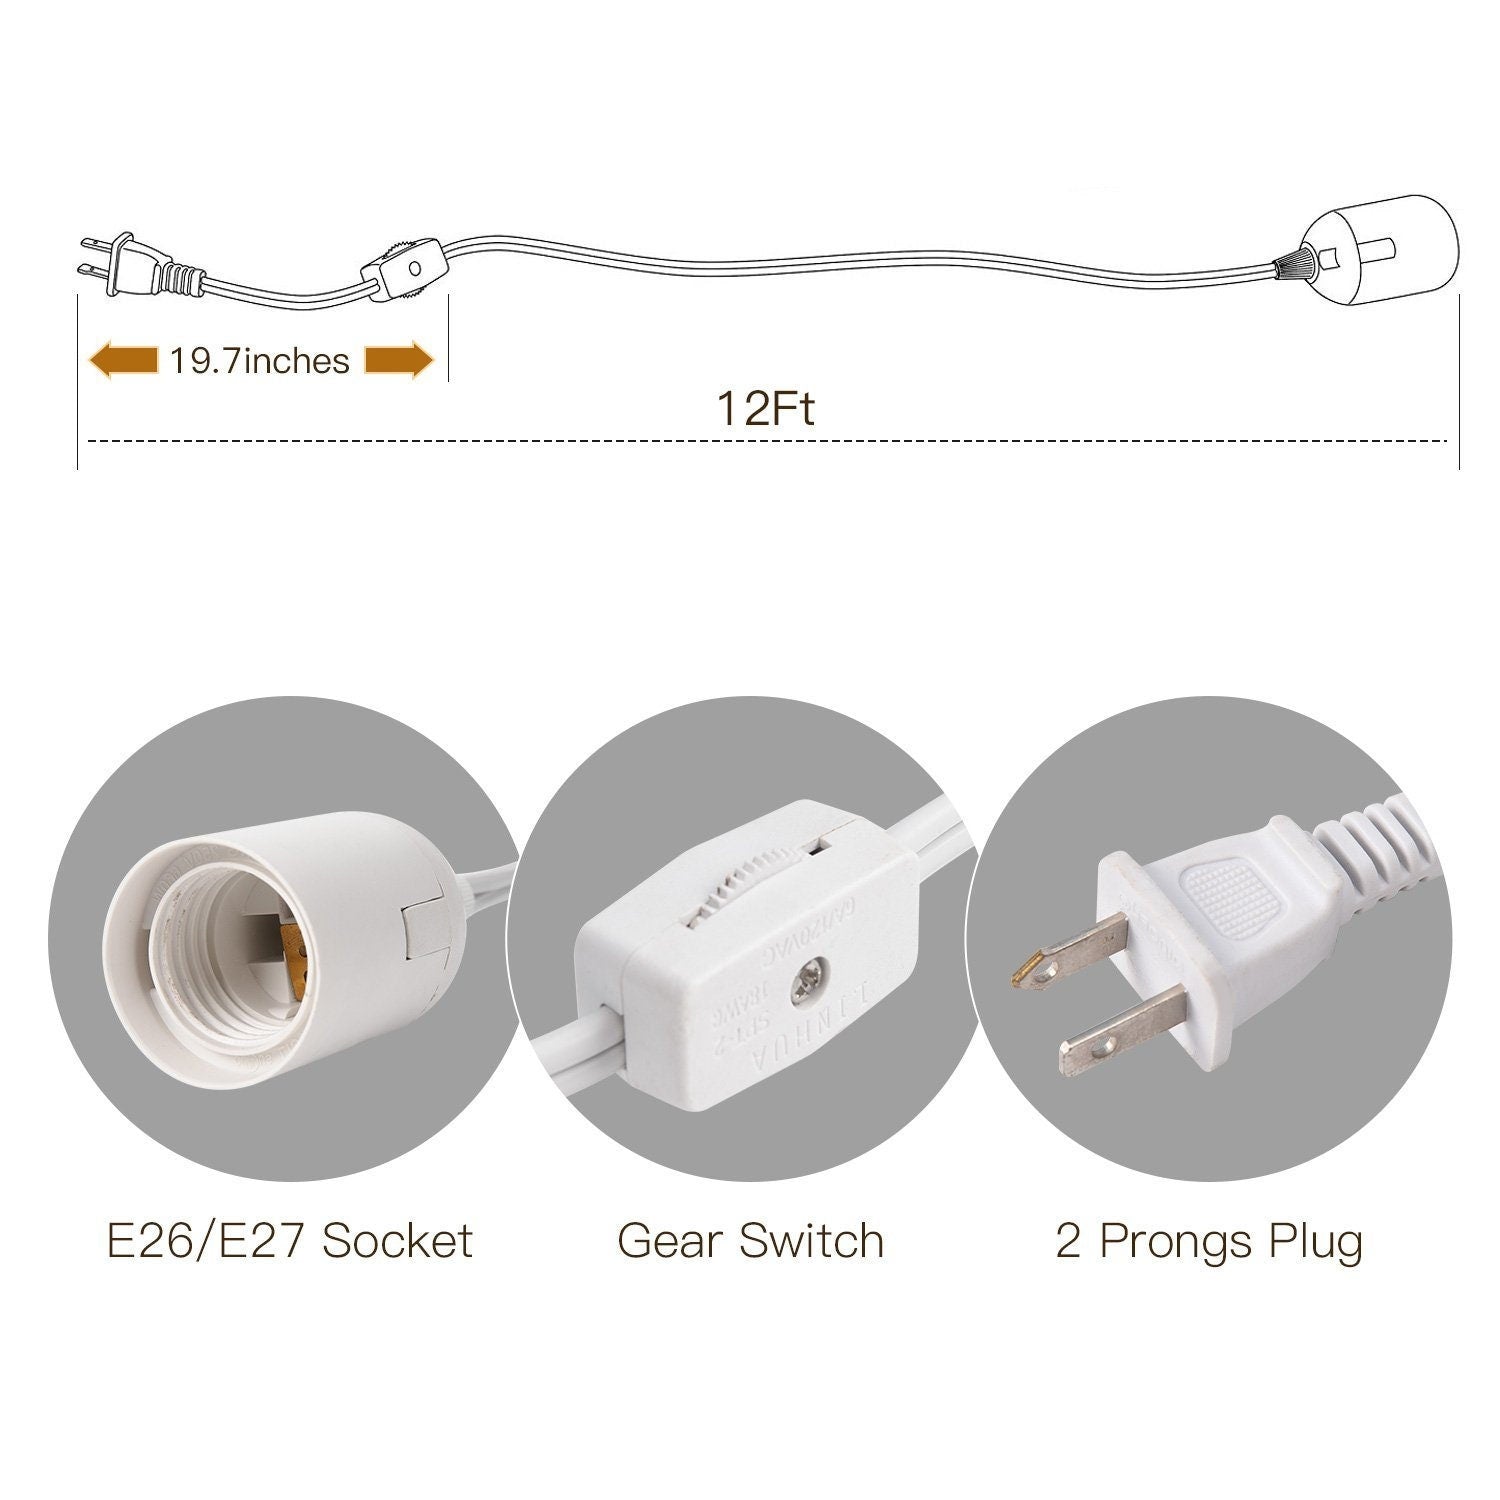 12ft E26/E27 Hanging Light Socket with Gear Switch Lantern